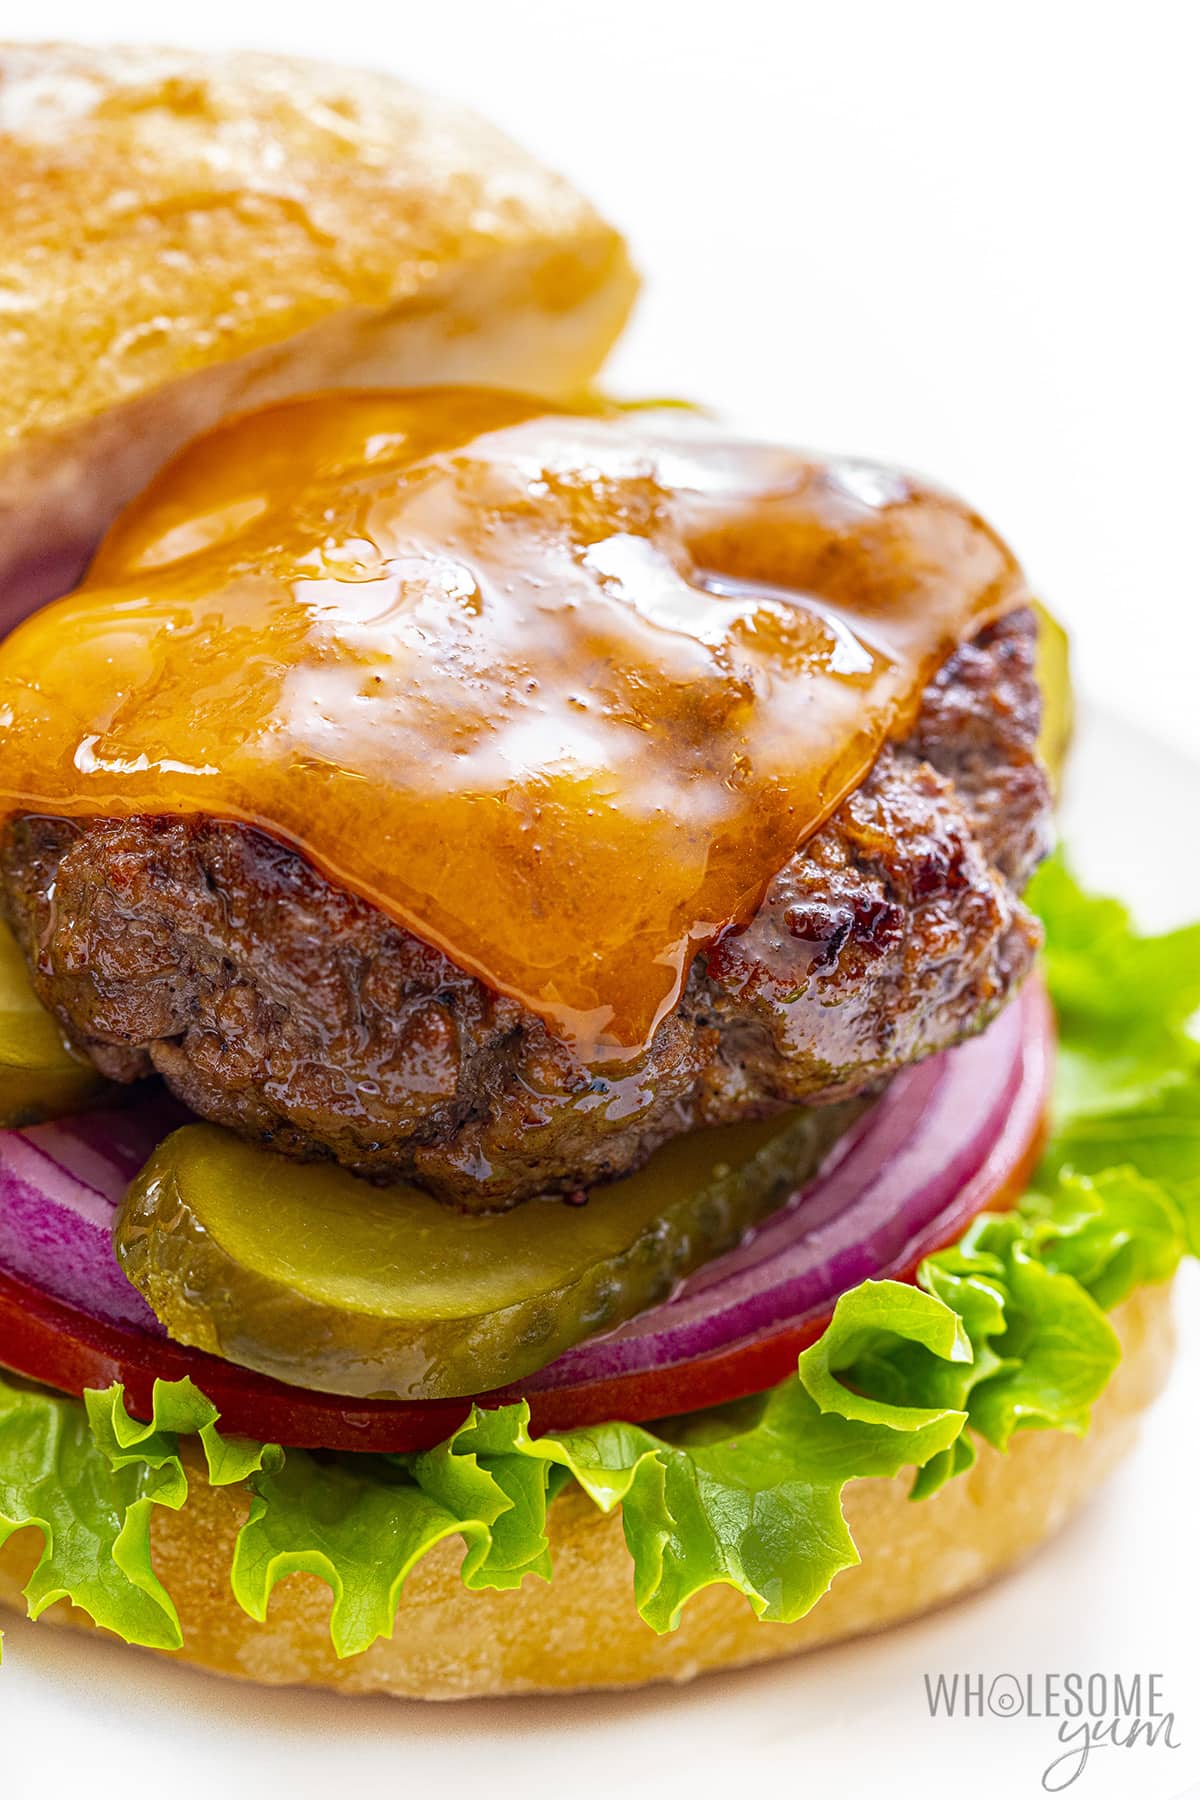 Best Grilled Hamburgers - Fed & Fit